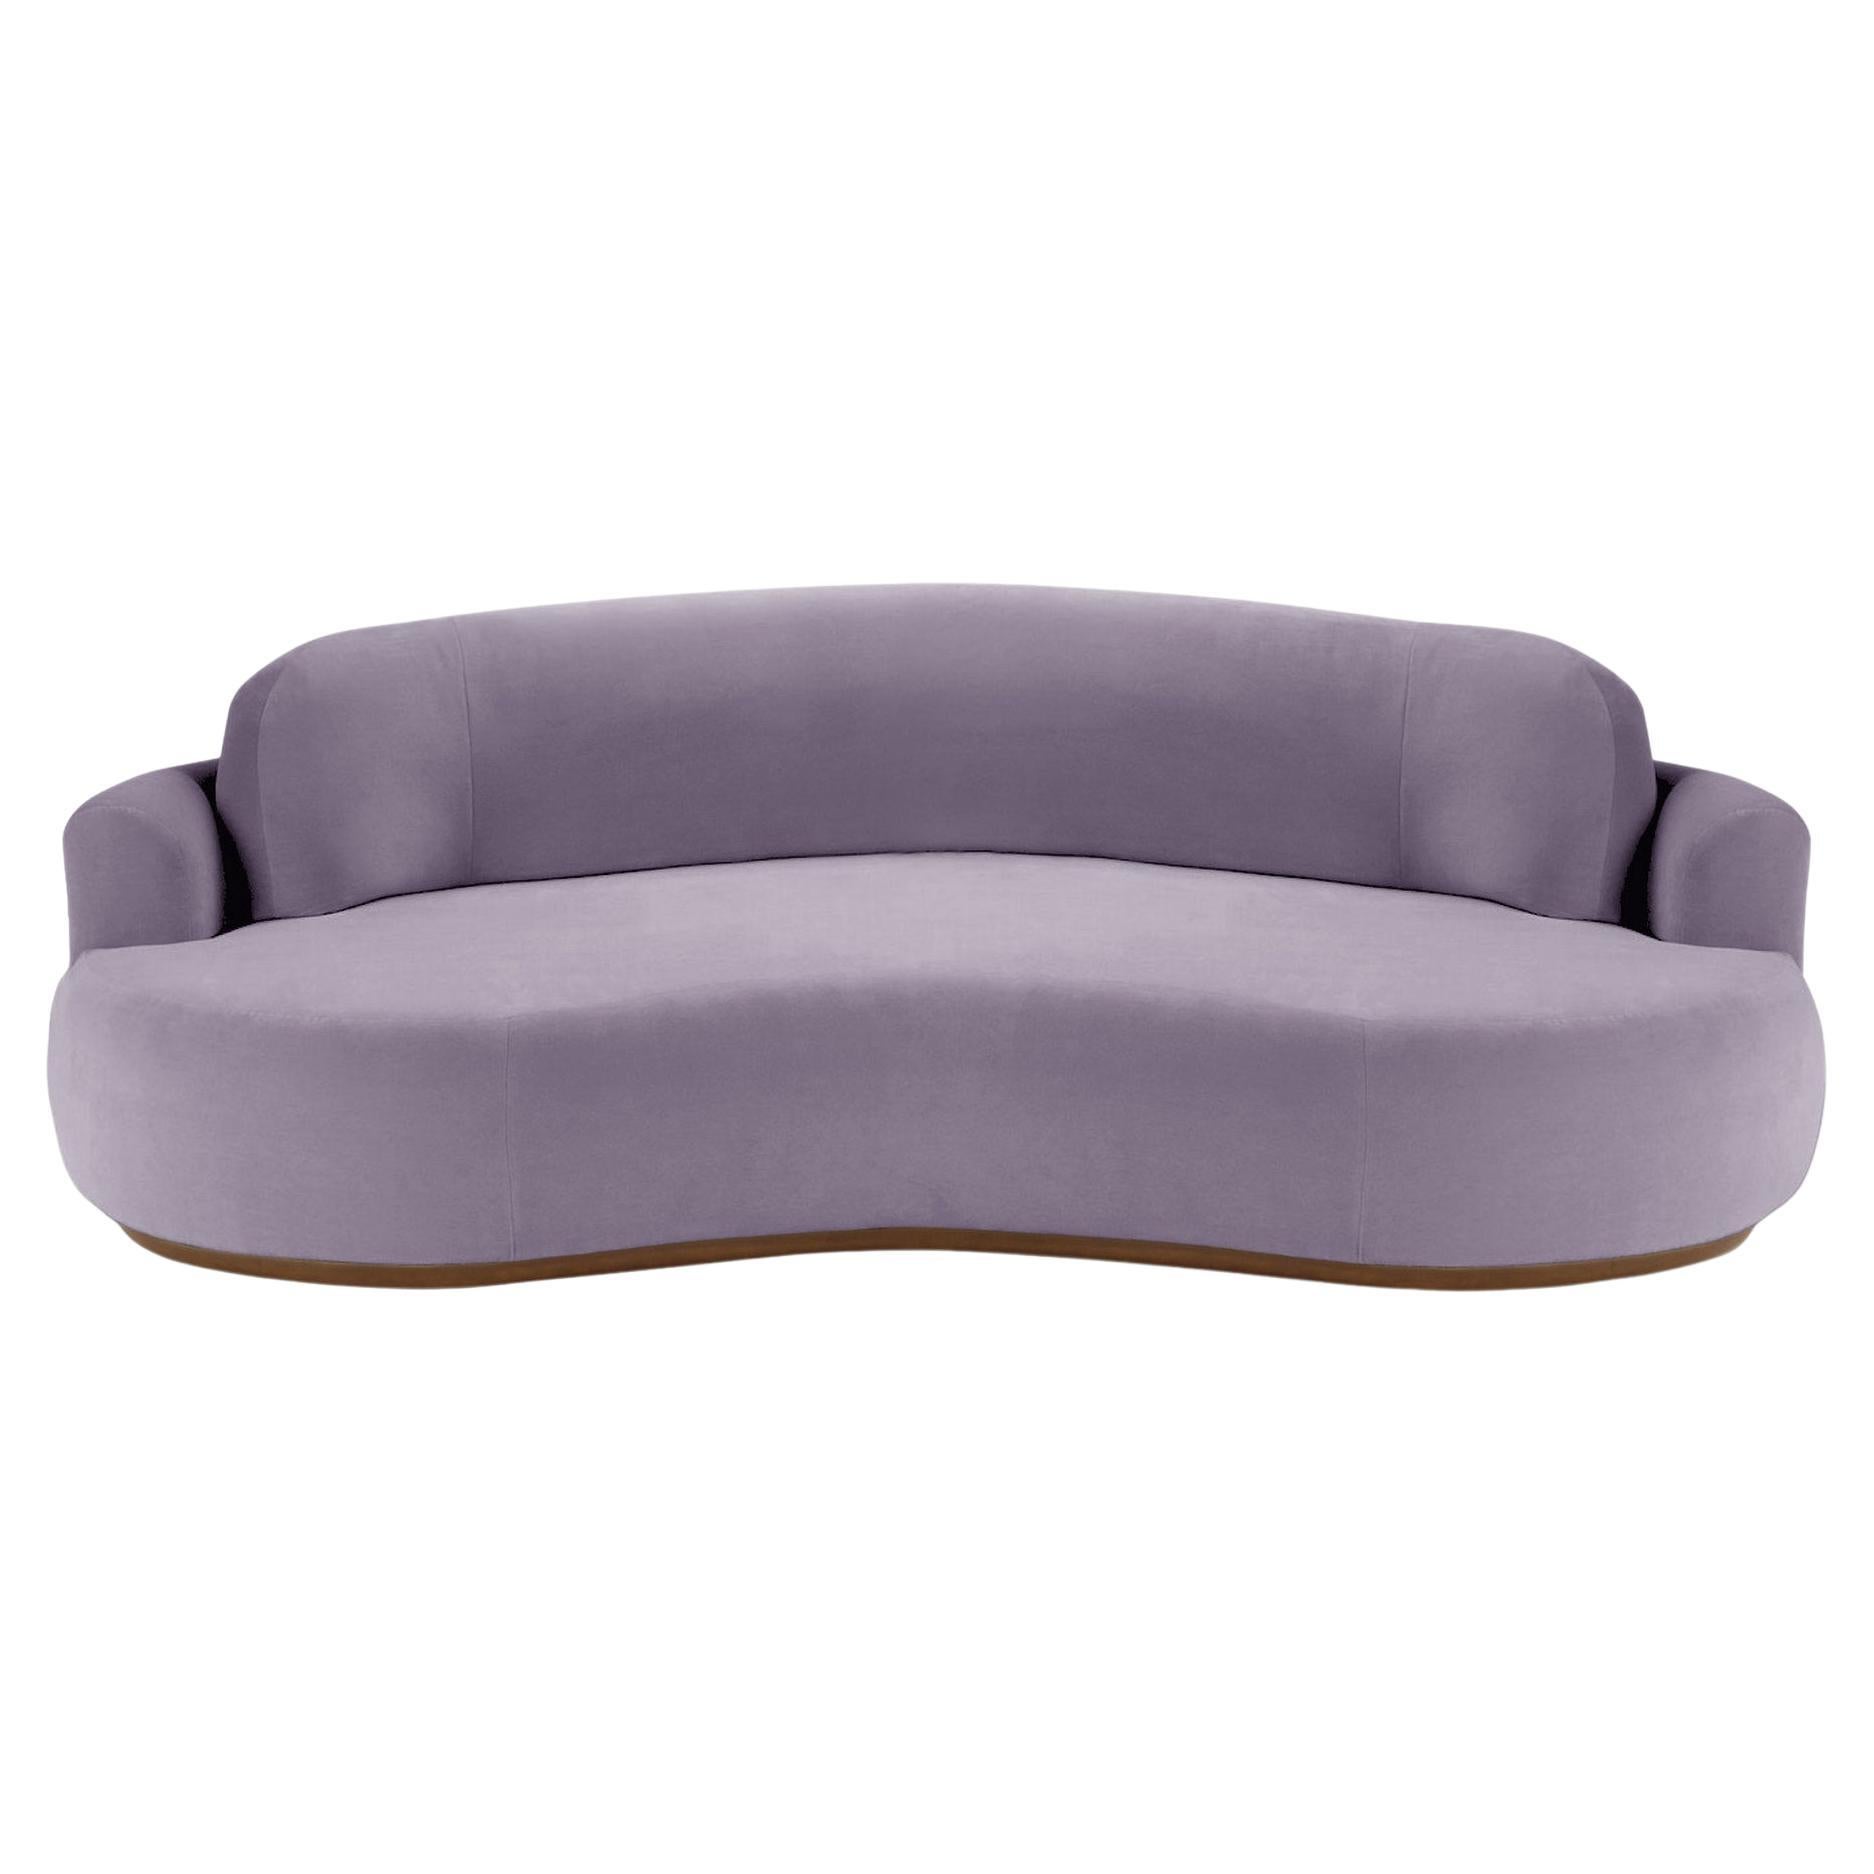 Naked Round Sofa, Small with Beech Ash-056-1 and Paris Lavanda